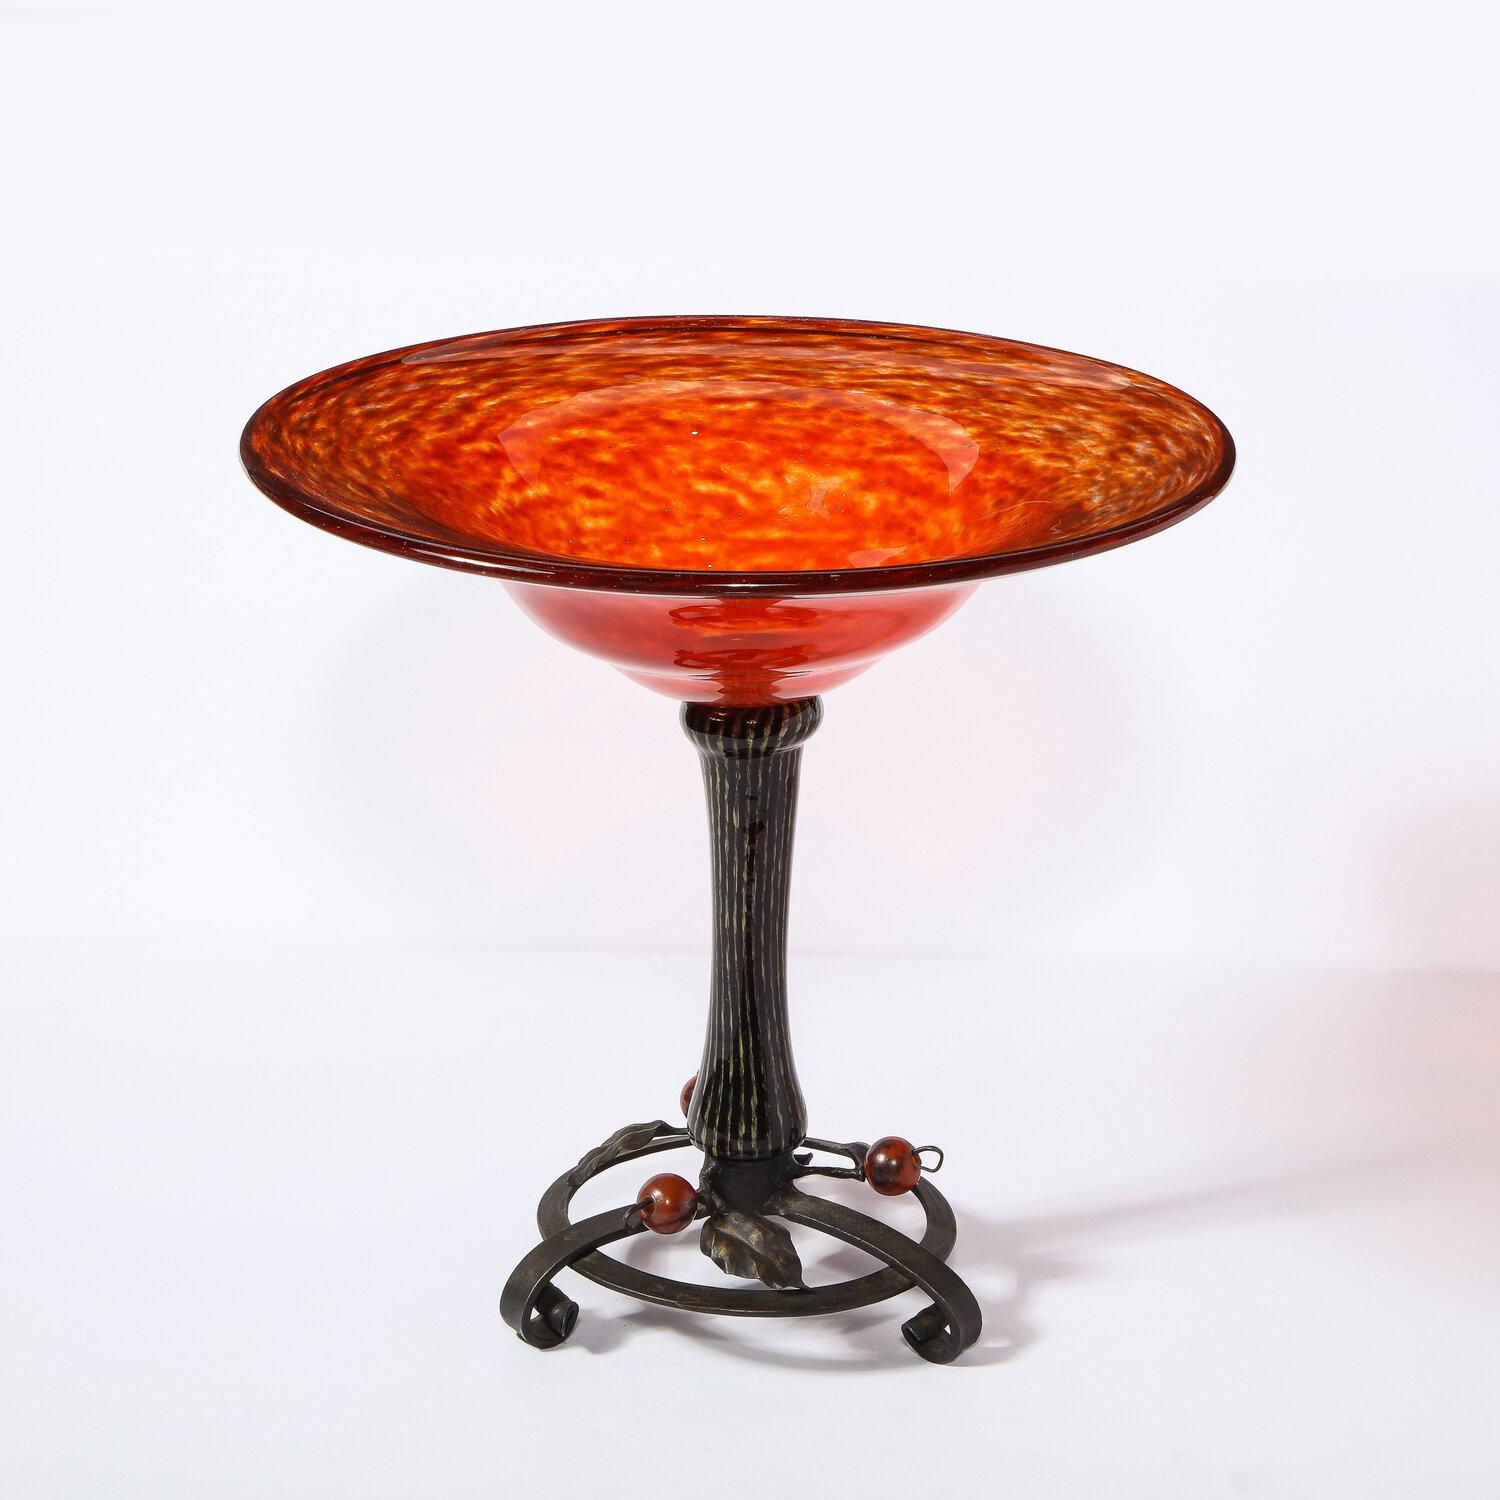 French Art Deco Mottled Carnelian Glass Bowl w/ Wrought Iron Base Signed by Schneider For Sale